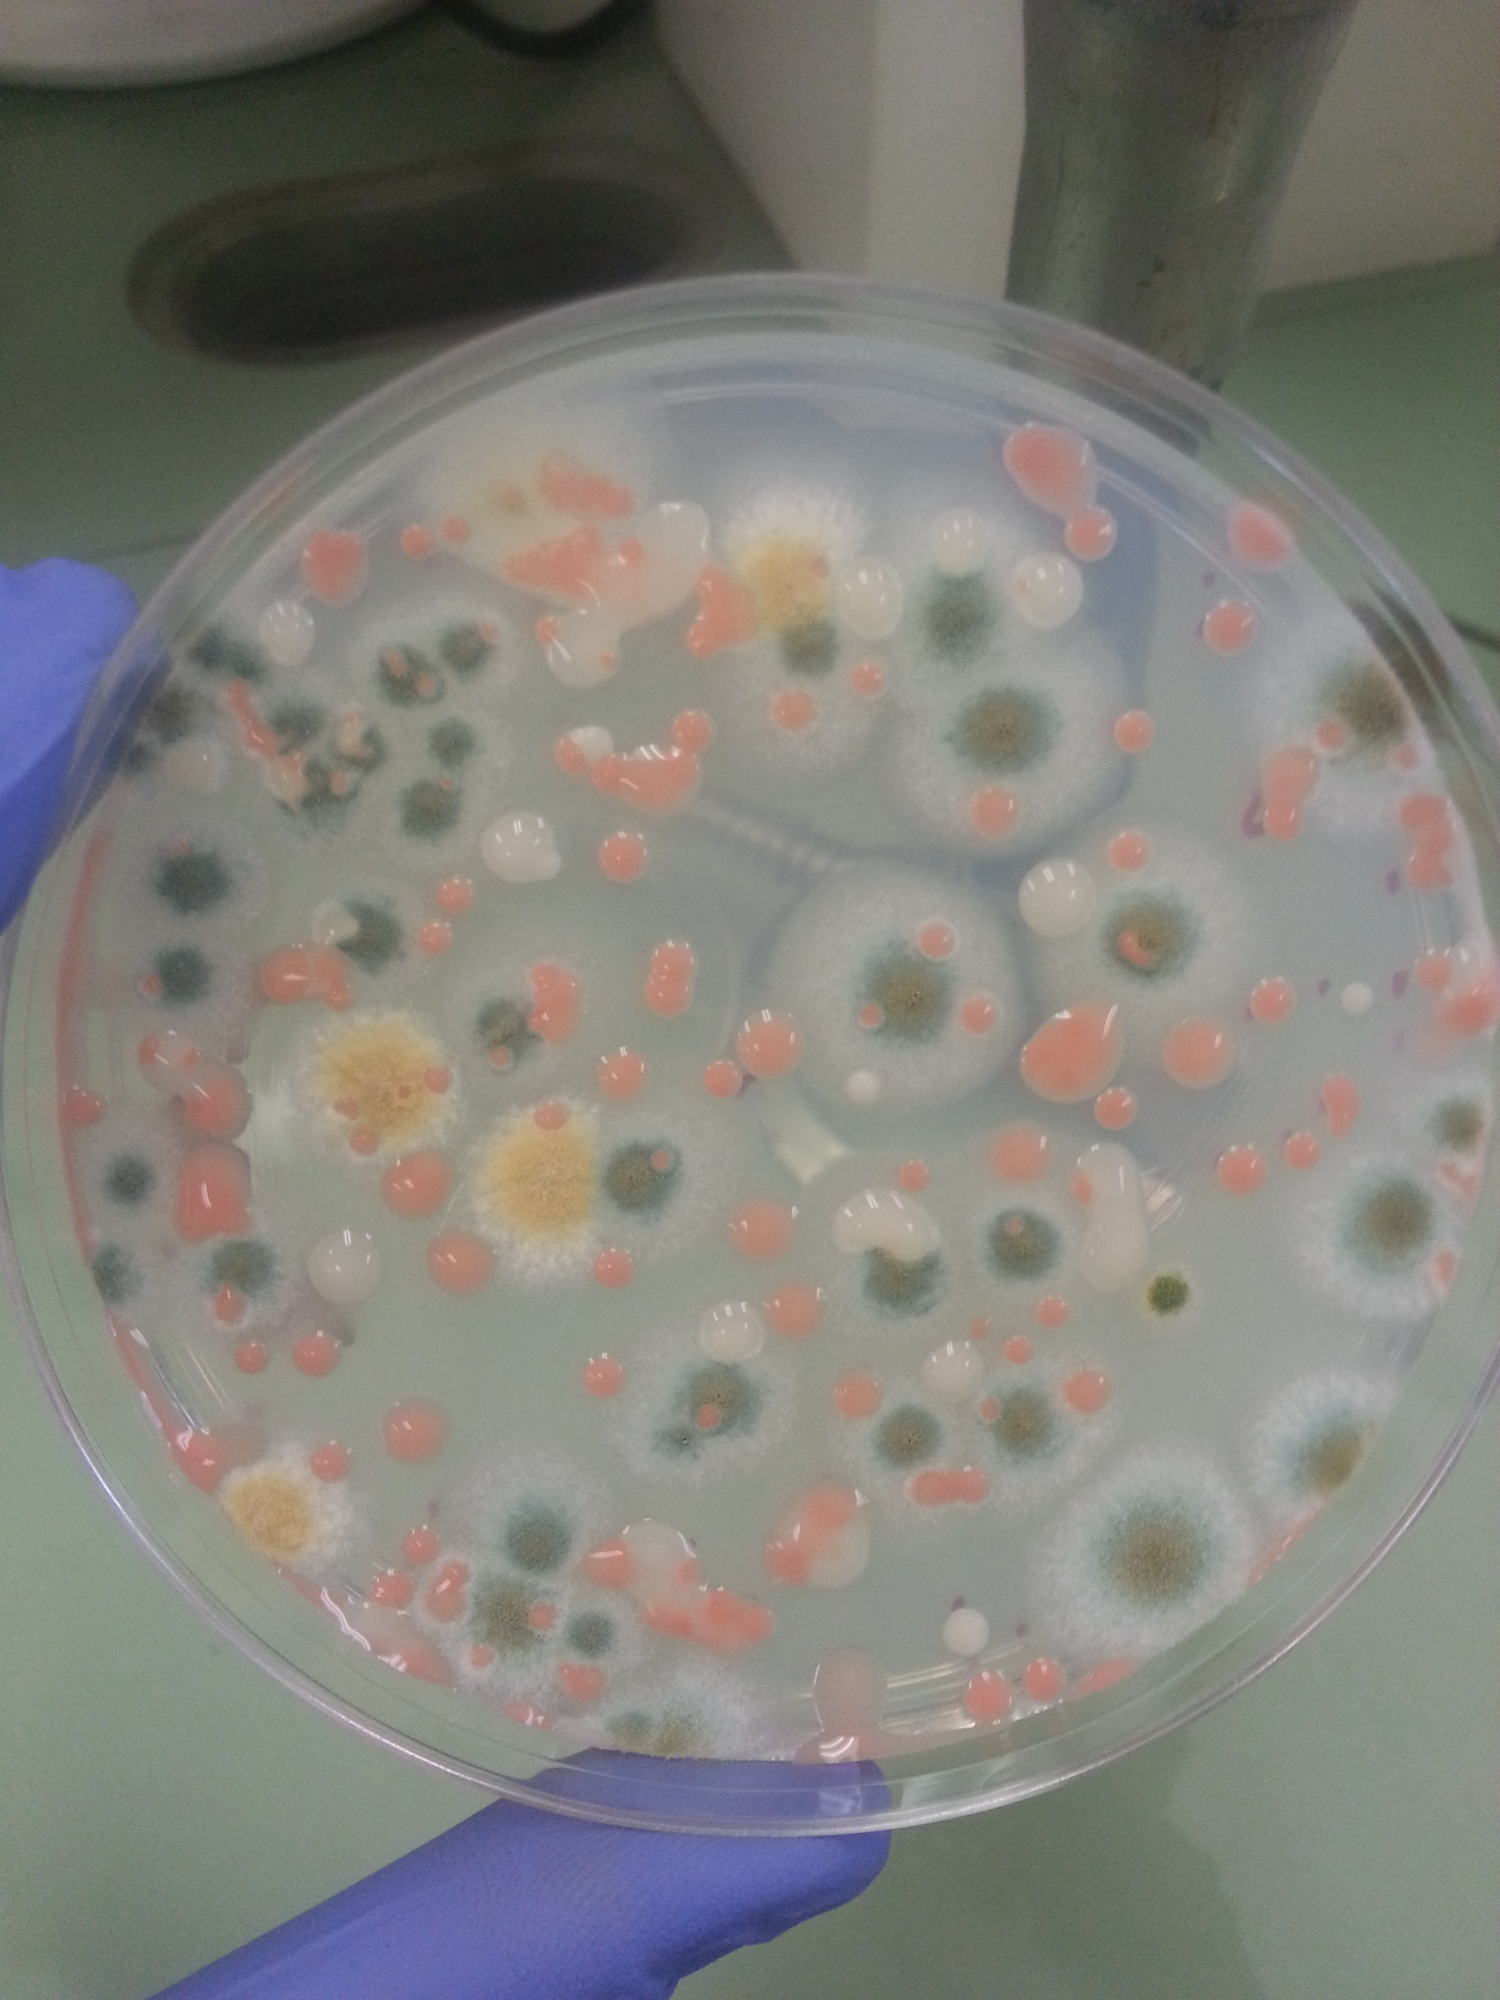 a variety of microbial growth of various colors on a petri dish